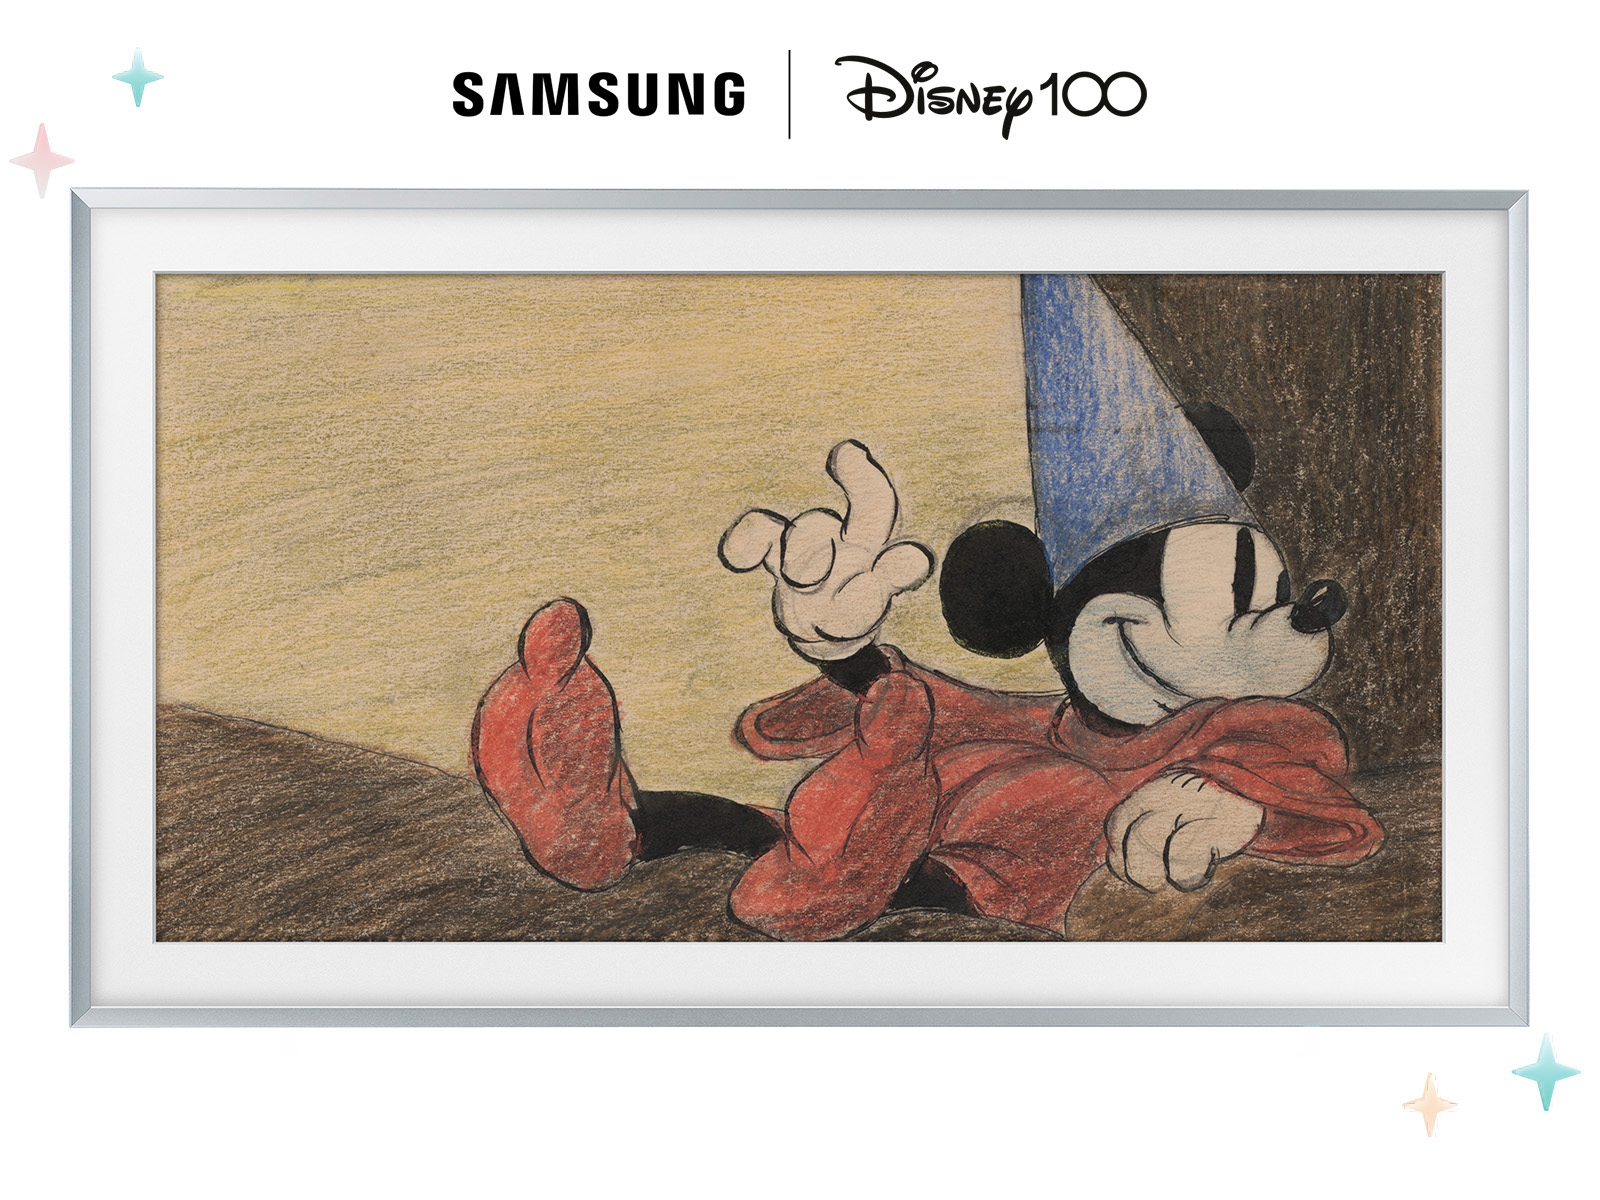 Samsung releases Frame Disney 100th anniversary edition - KED Global